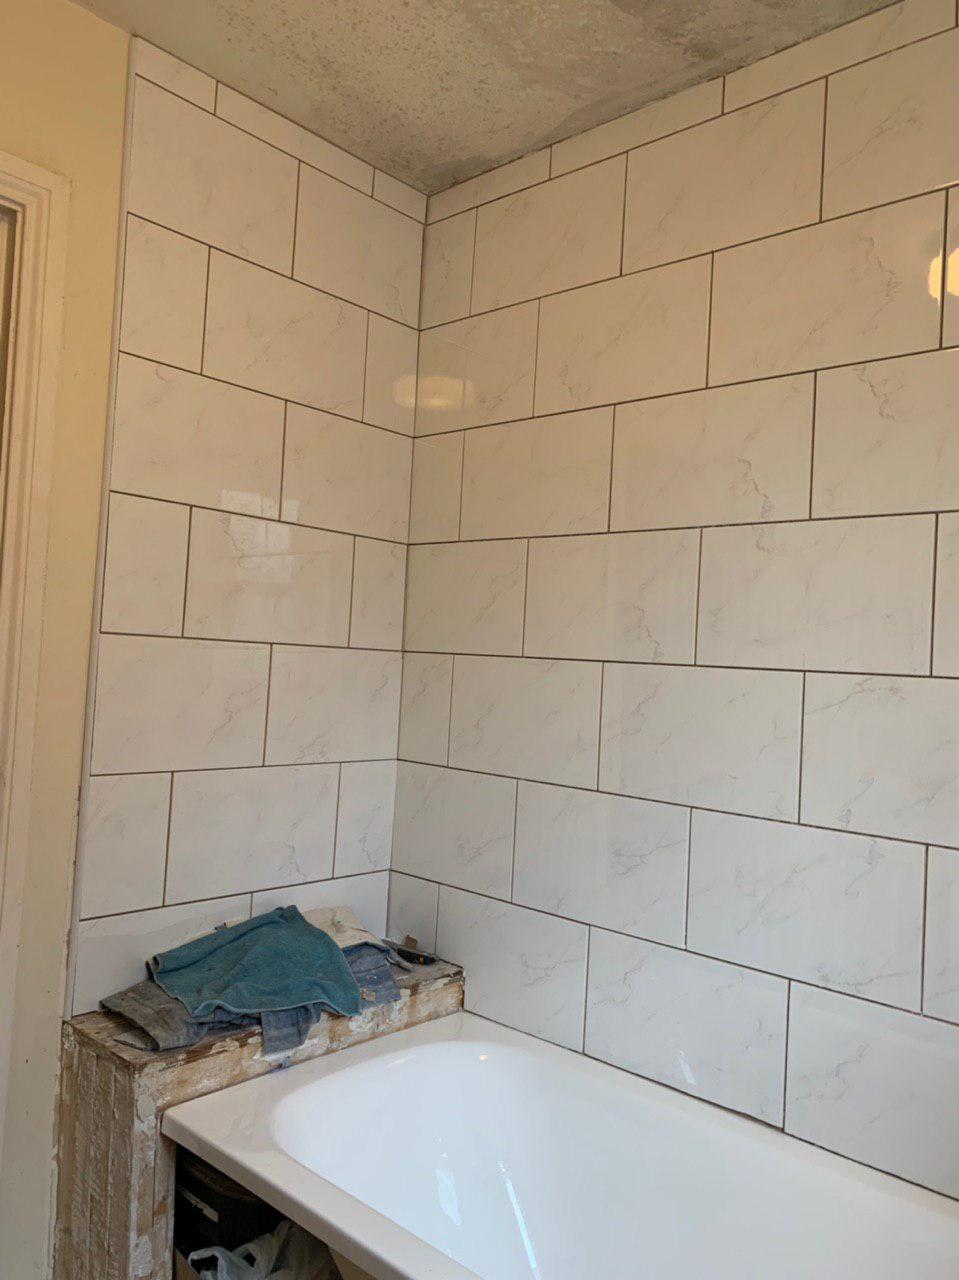 Small bathroom refurbishment for a landlords rental property completed in 3 days 4